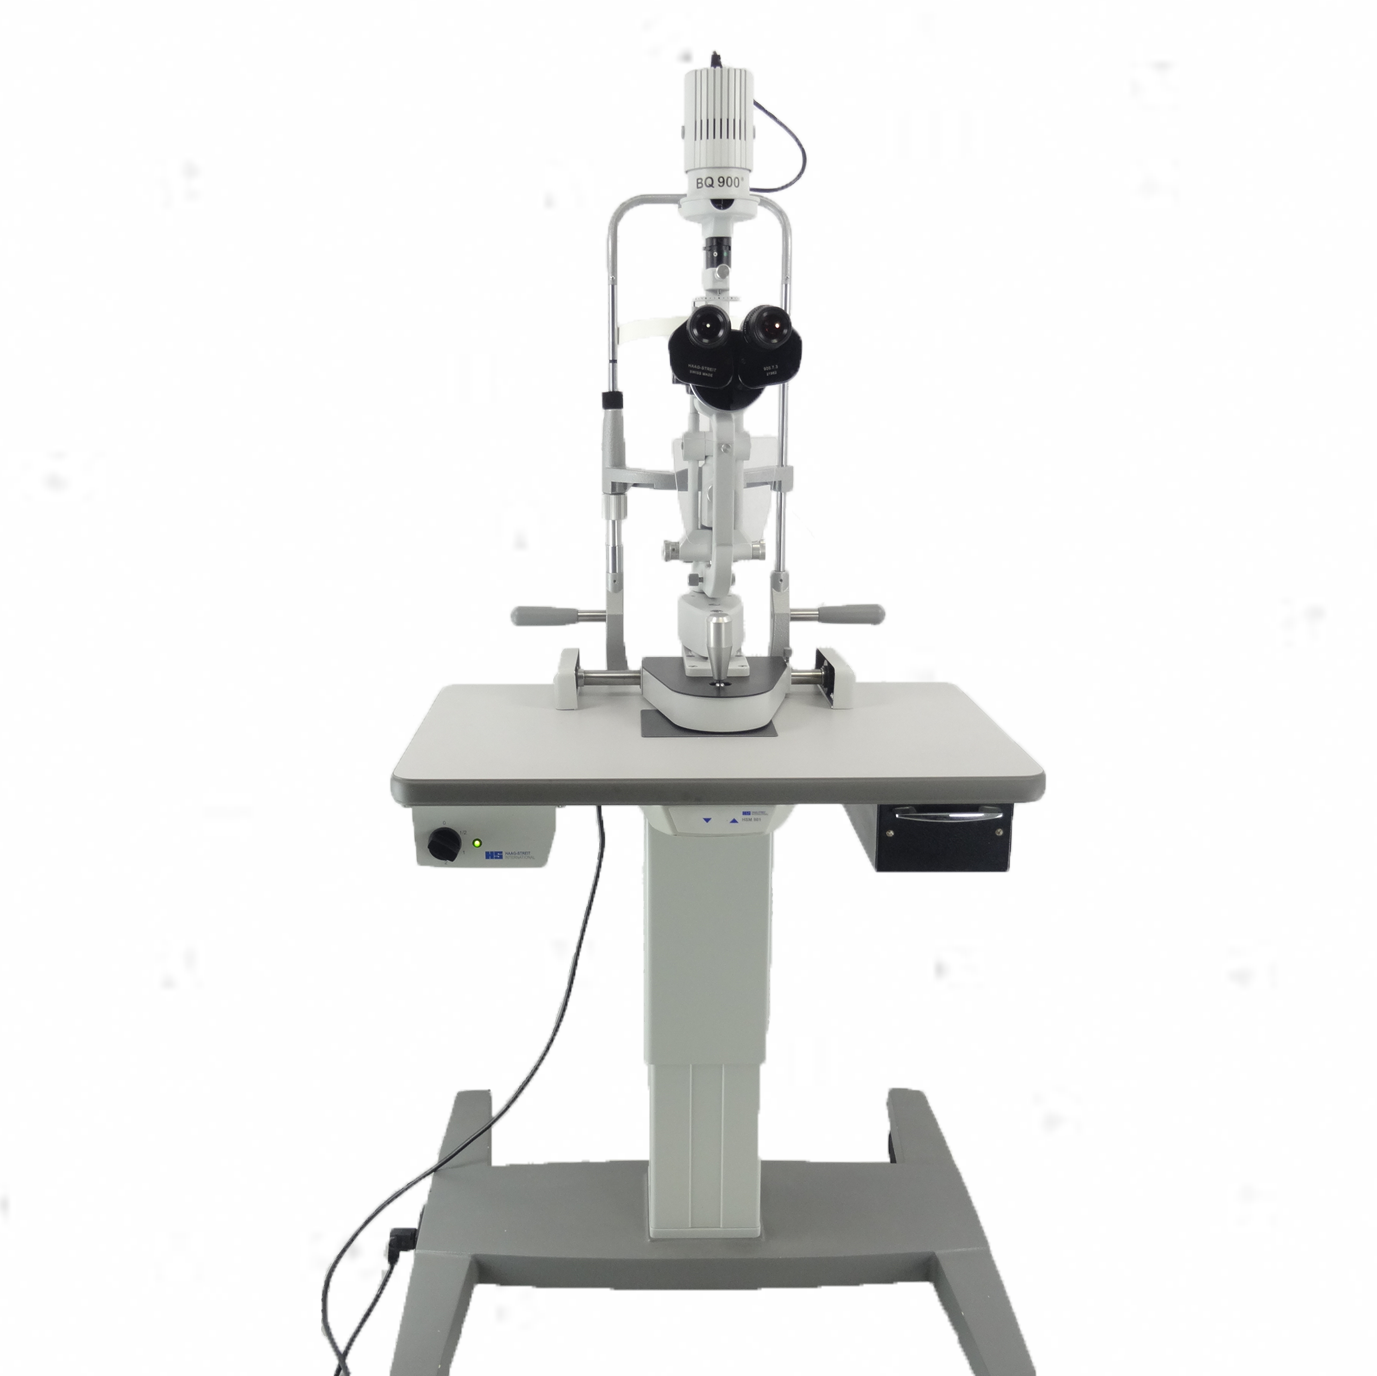 Oficial pago excepción HAAG-STREIT SLIT LAMP BQ 900 WITH TABLE - Medlikim